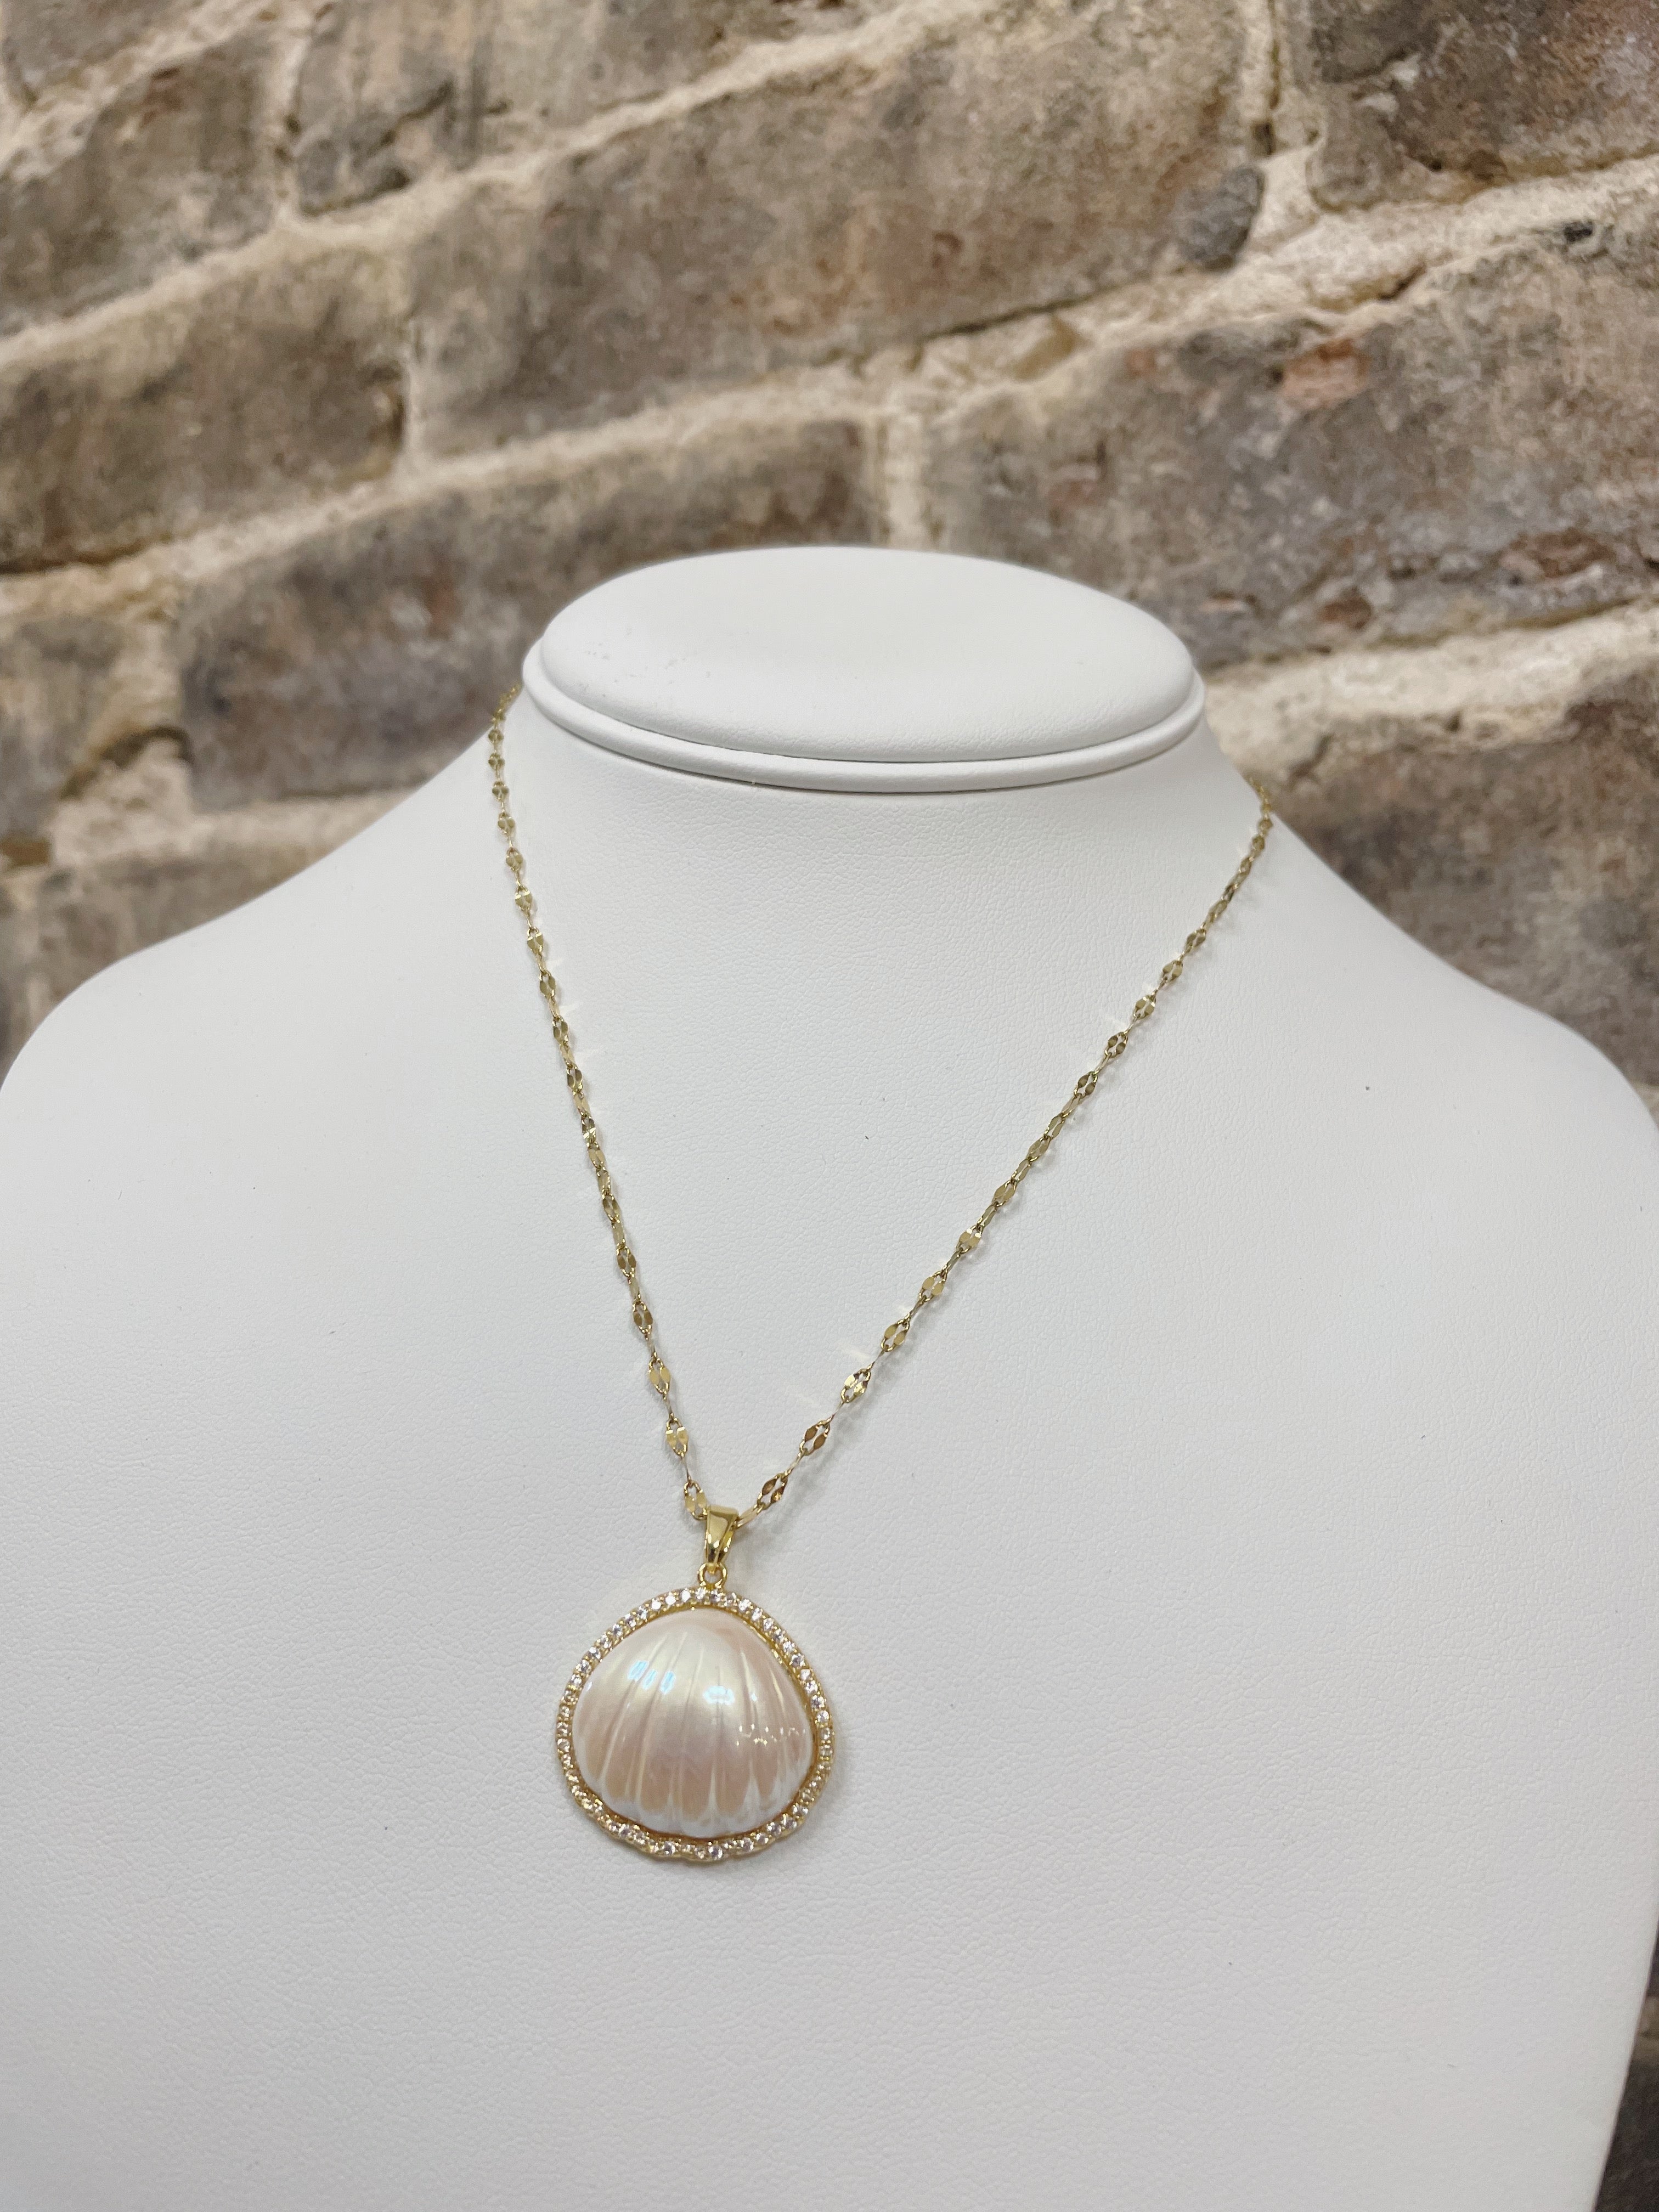 Coastal Shell Necklace - Gold - Water Resistant